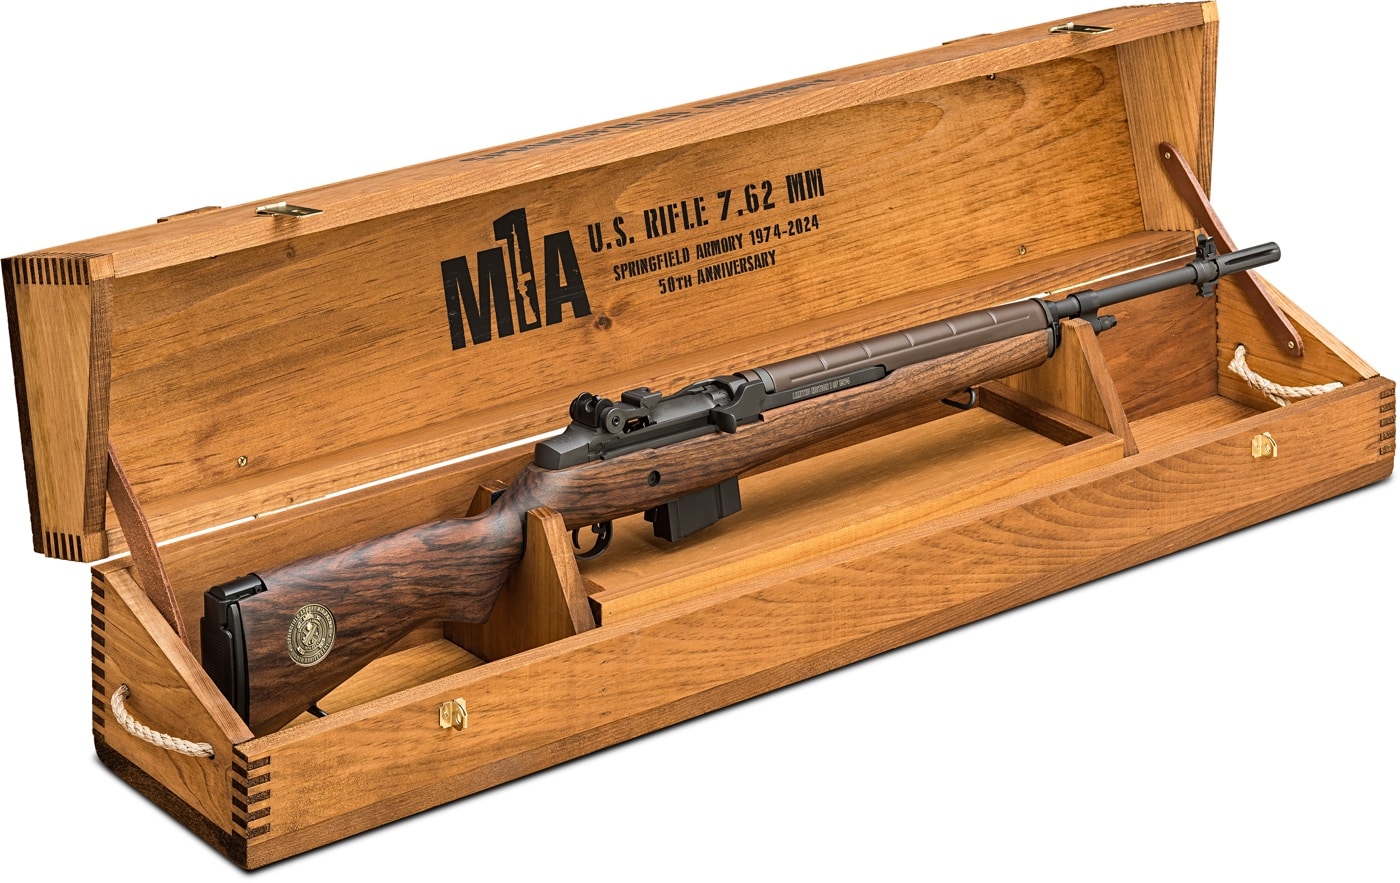 Limited Special Edition 50th Anniversary Springfield Armory M1A rifle